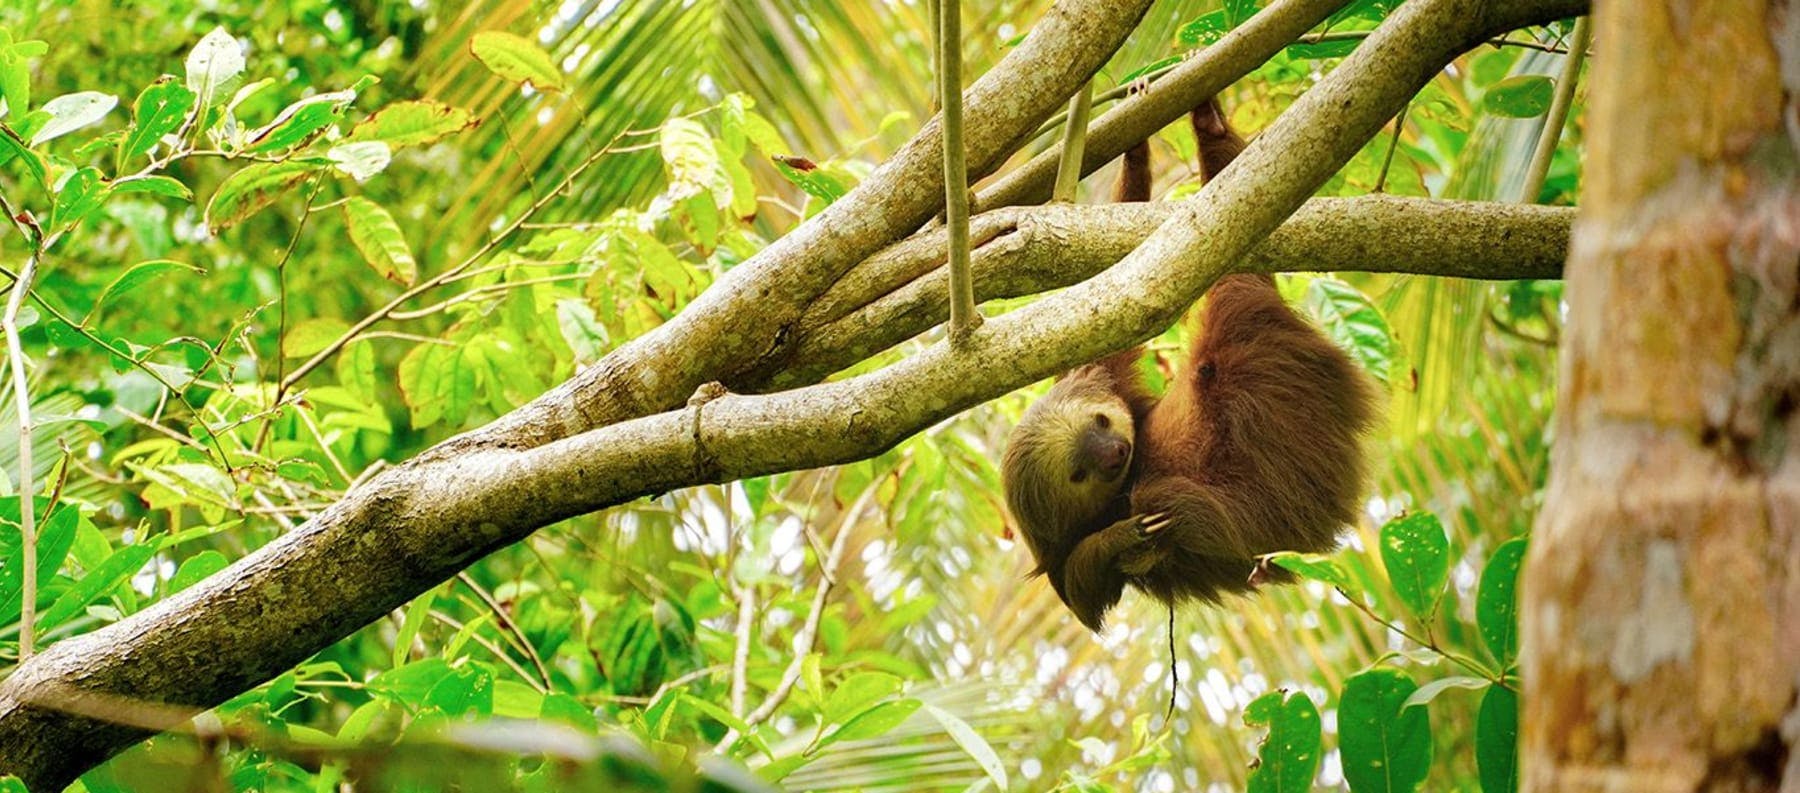 Sloth in a tree in Costa Rica